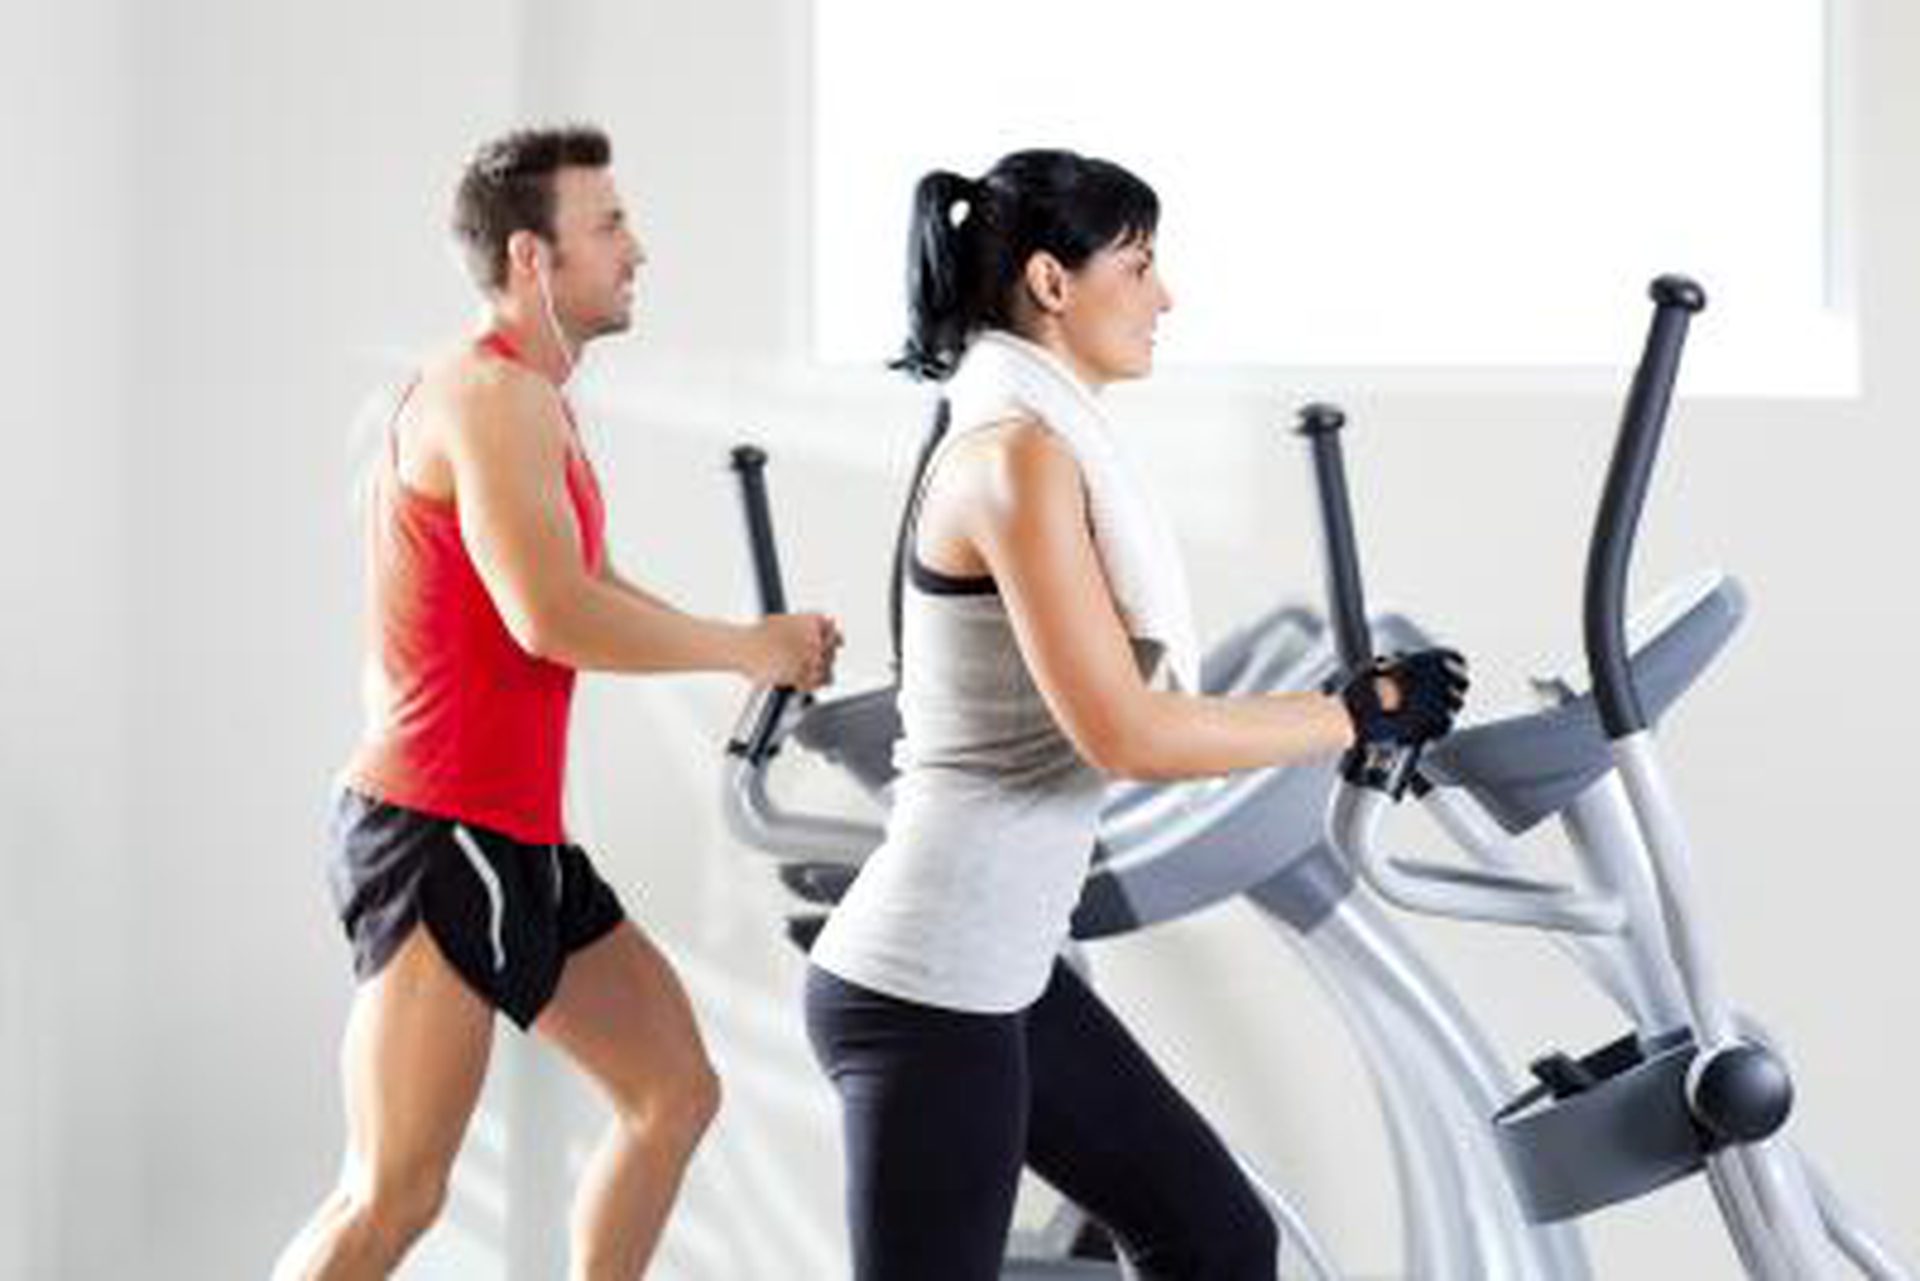 How Long Per Day Should I Use the Elliptical Trainer? | LIVESTRONG.COM